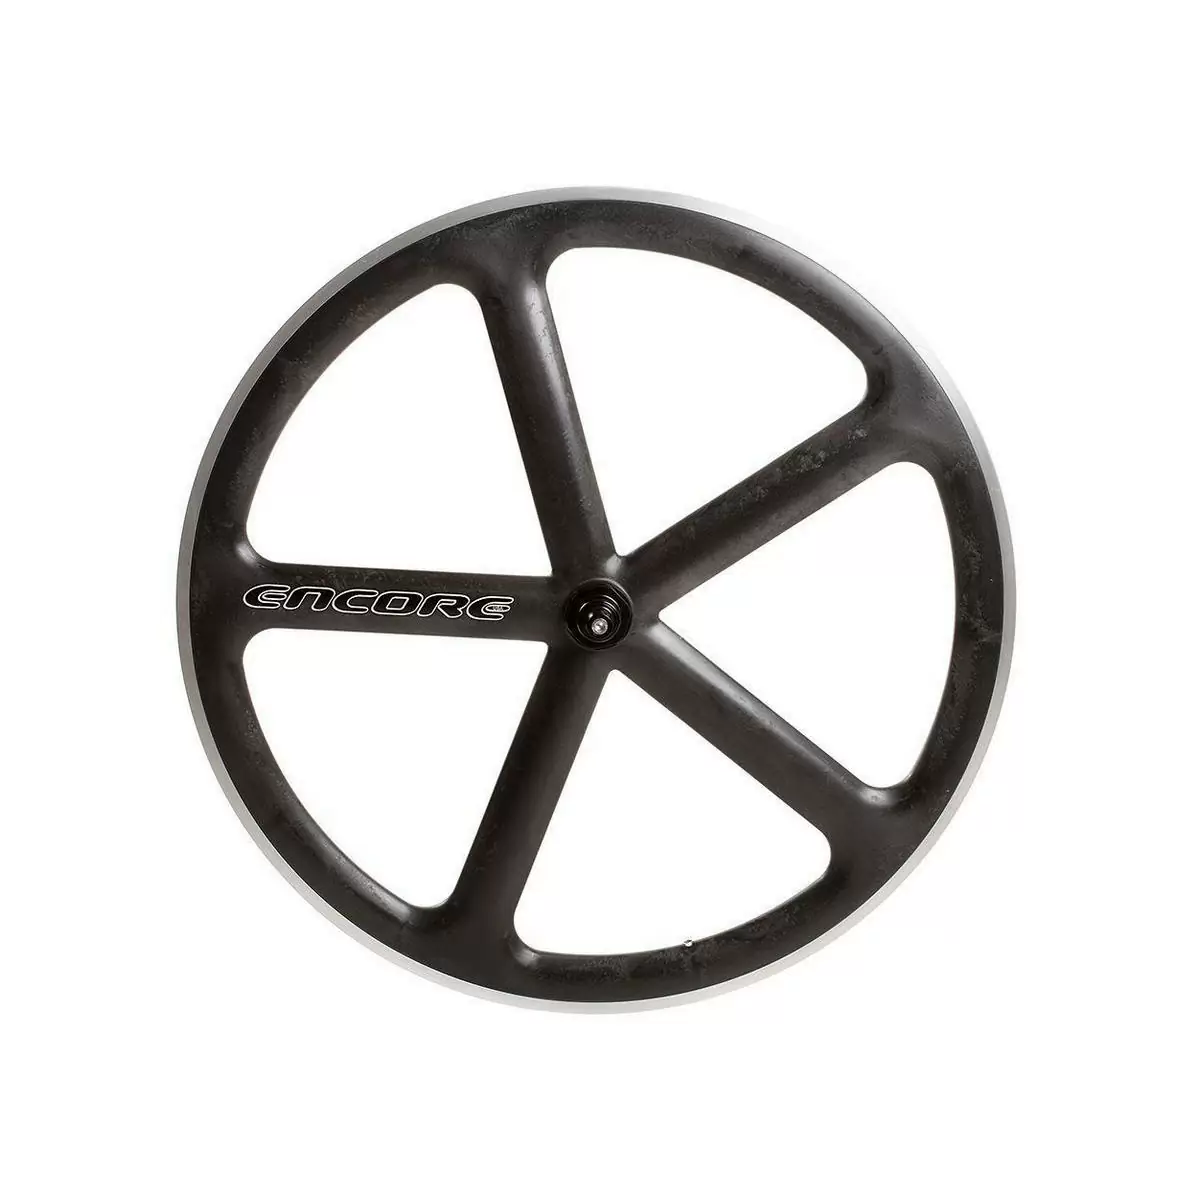 front wheel 700c track 5 spokes carbon weave natural msw - image